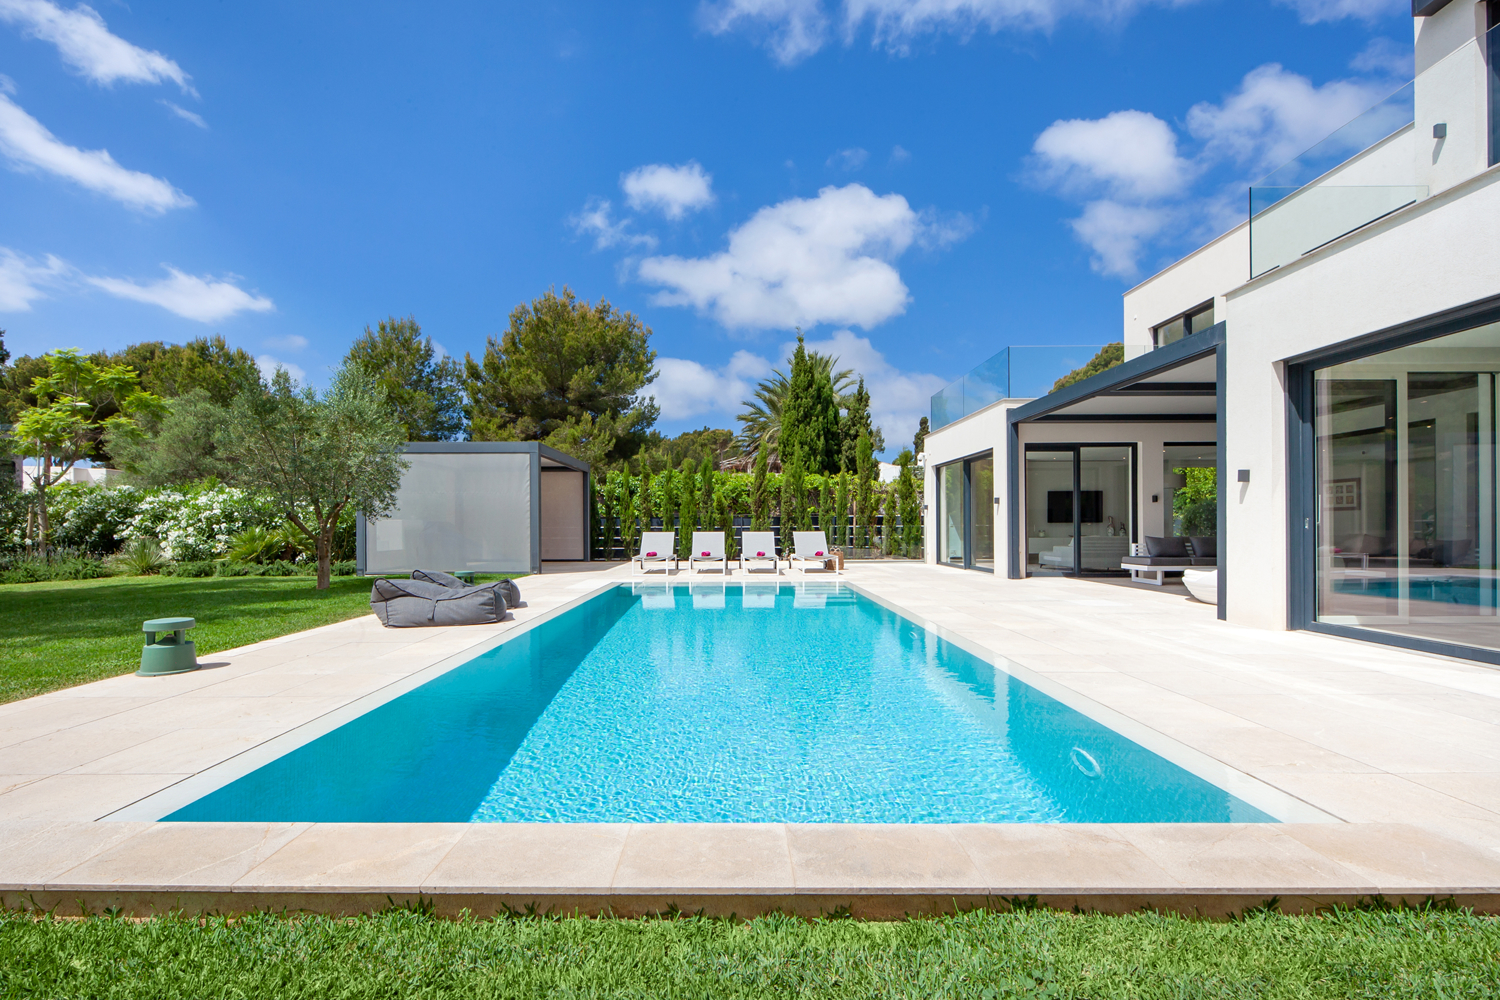 Stunning modern villa in Sol de Mallorca with pool and guest apartment